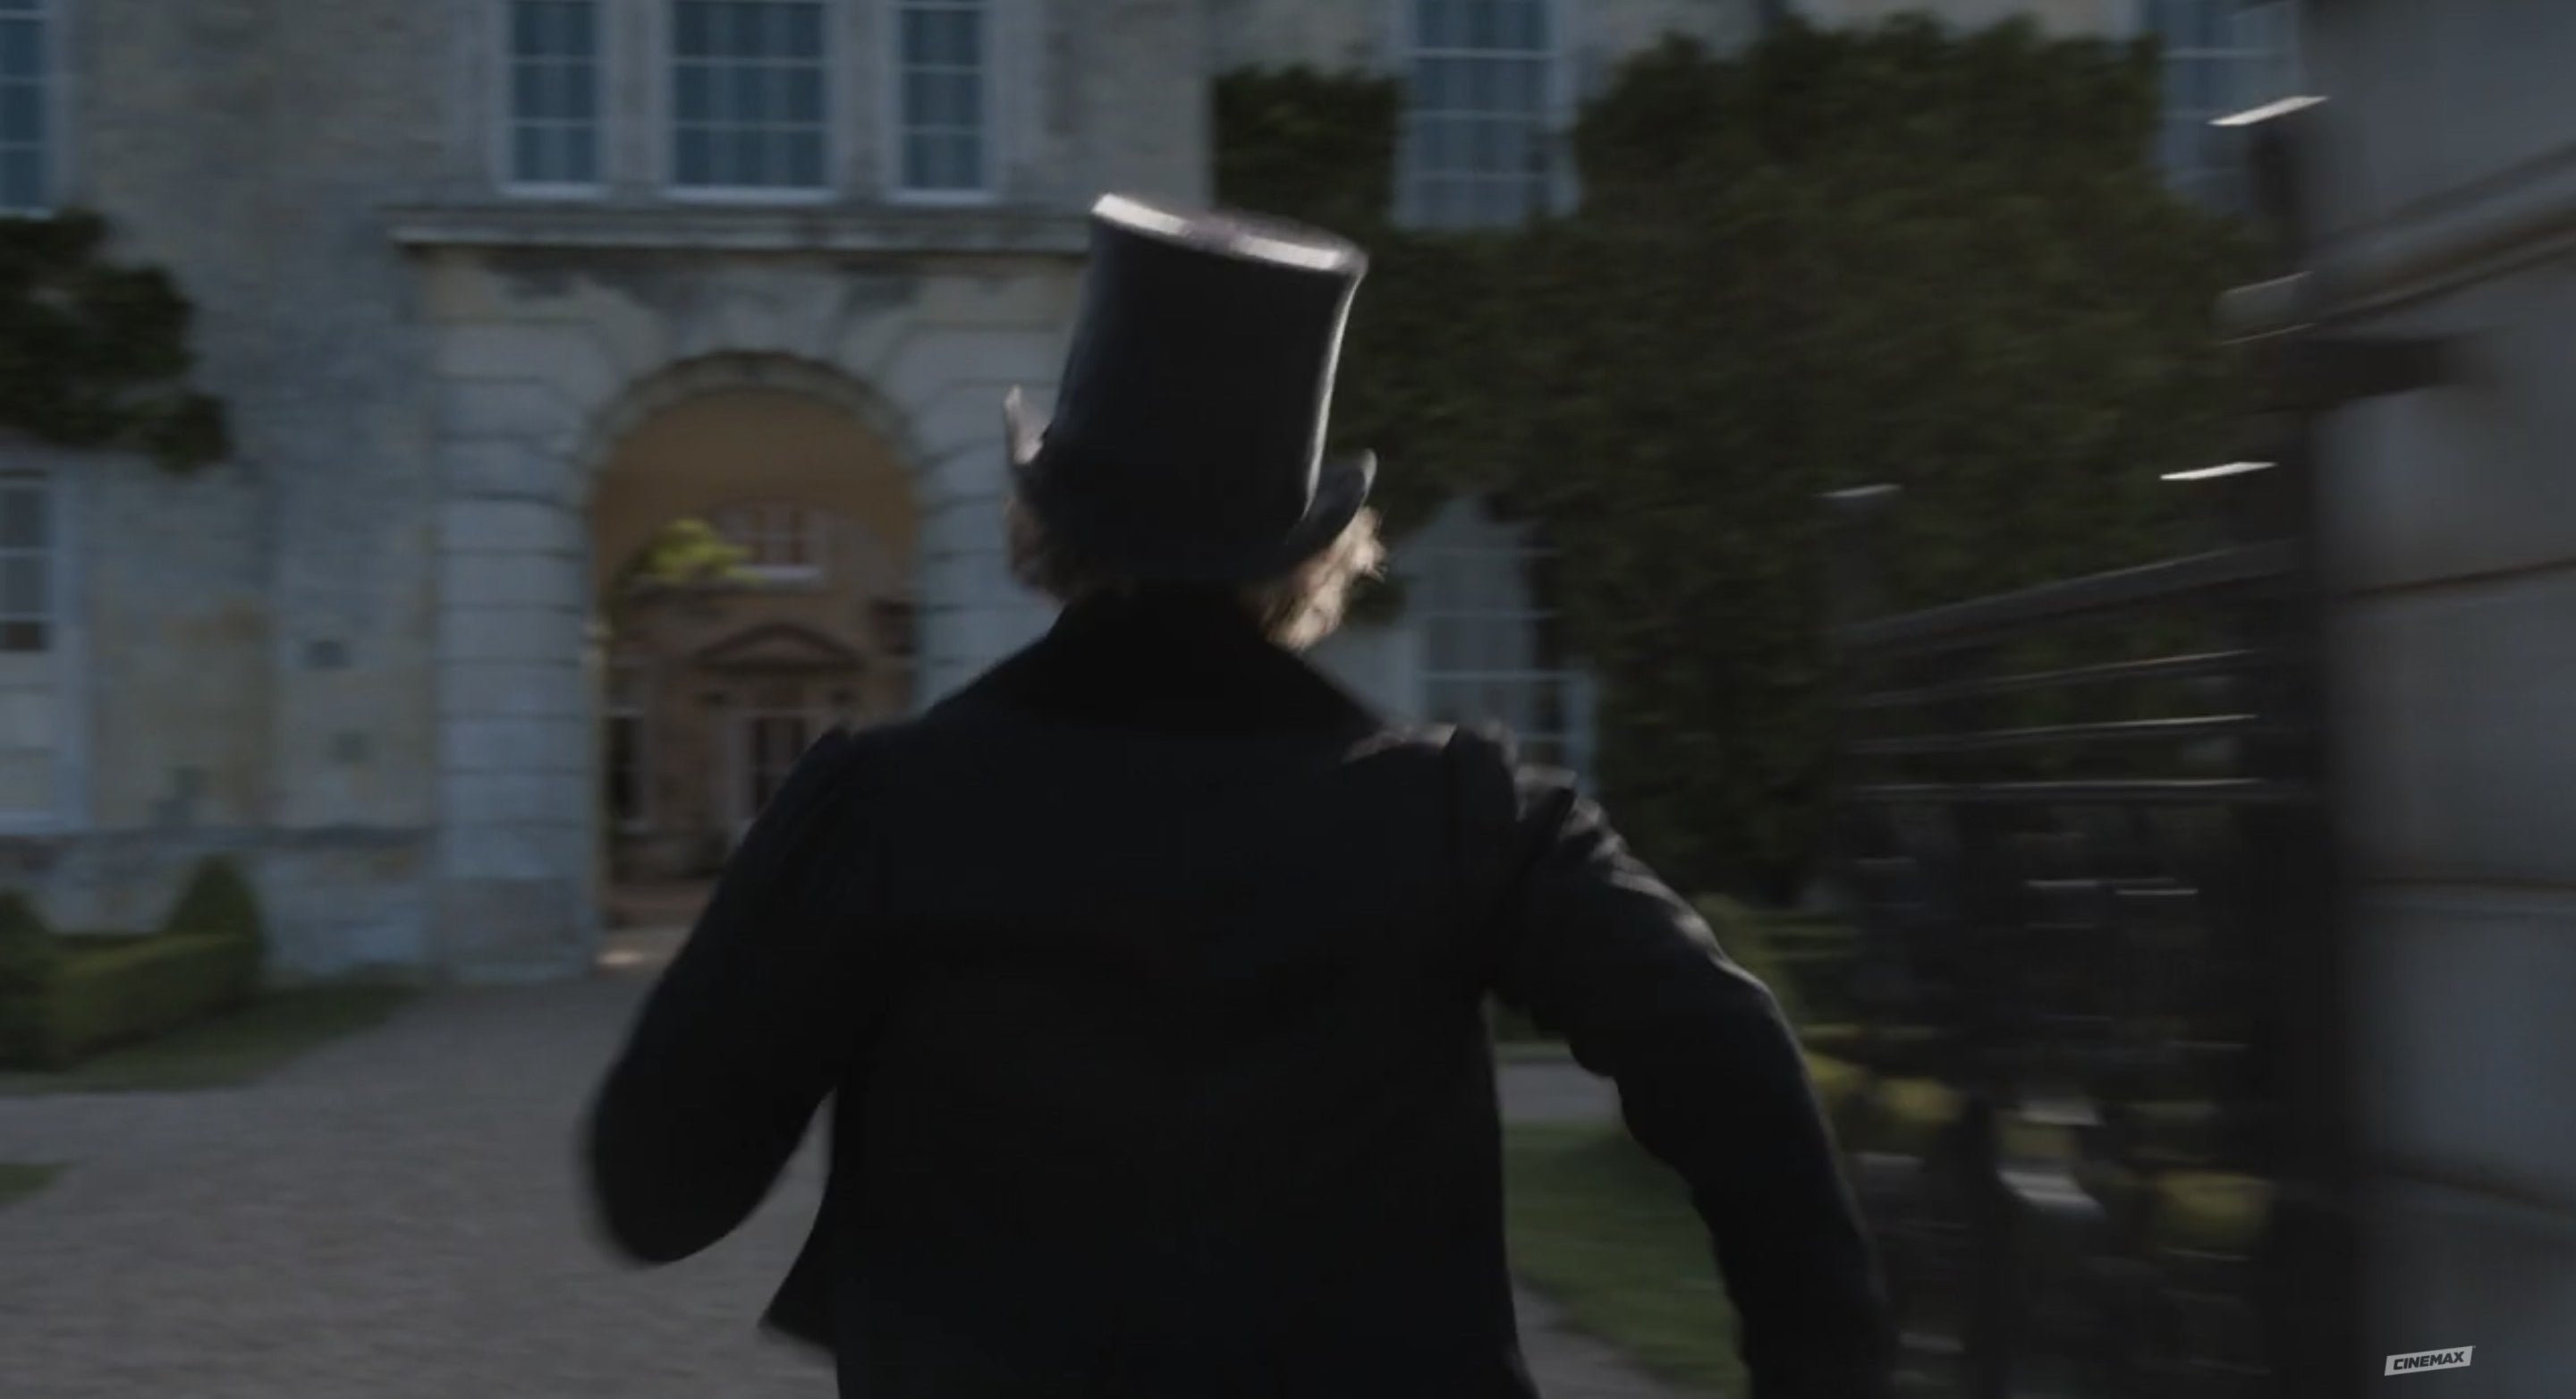 Knightley in a top hat running, we see him from behind